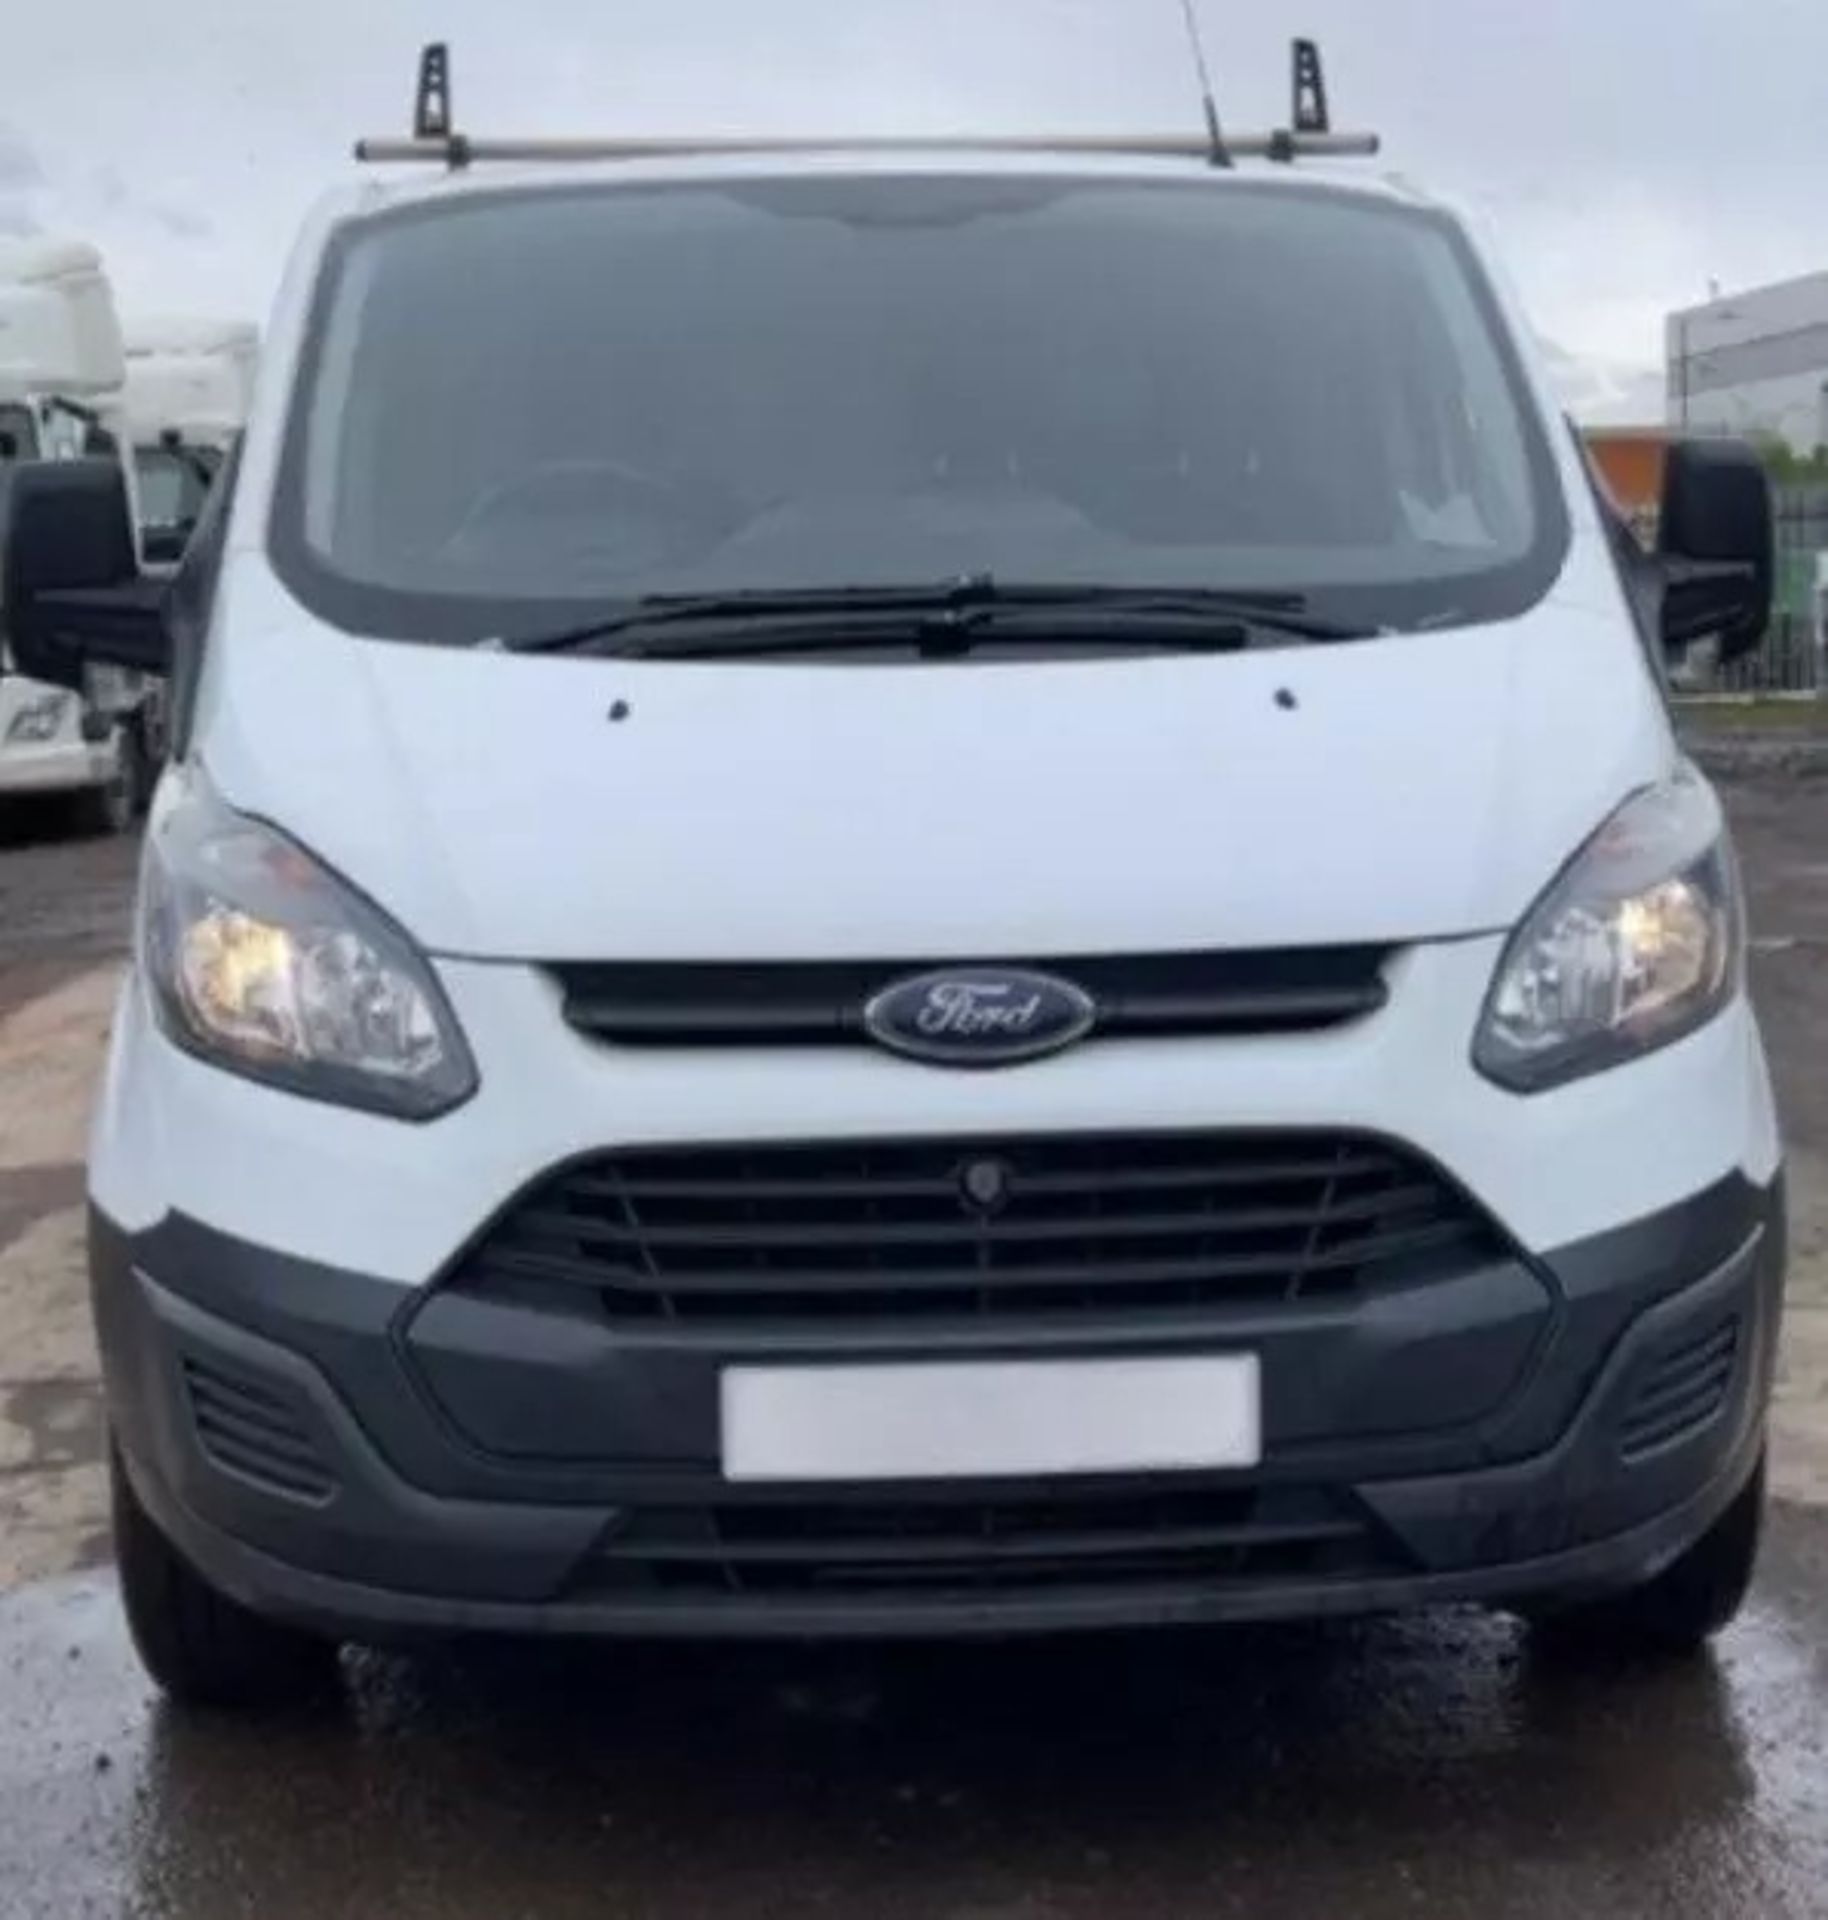 2015 FORD TRANSIT CUSTOM PANEL VAN - RELIABLE, WELL-MAINTAINED, AND READY FOR WORK - Image 5 of 12